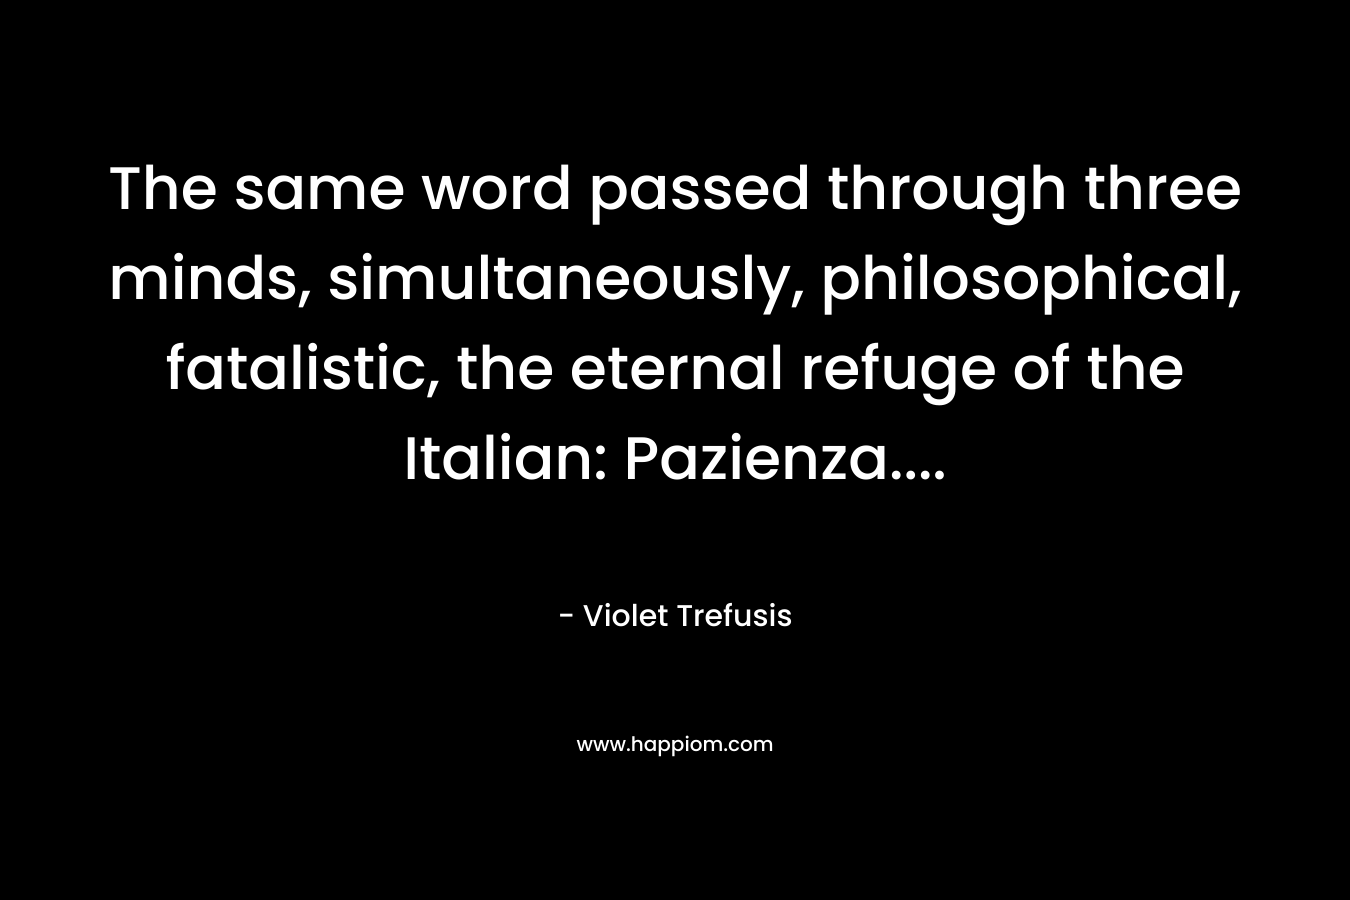 The same word passed through three minds, simultaneously, philosophical, fatalistic, the eternal refuge of the Italian: Pazienza…. – Violet Trefusis